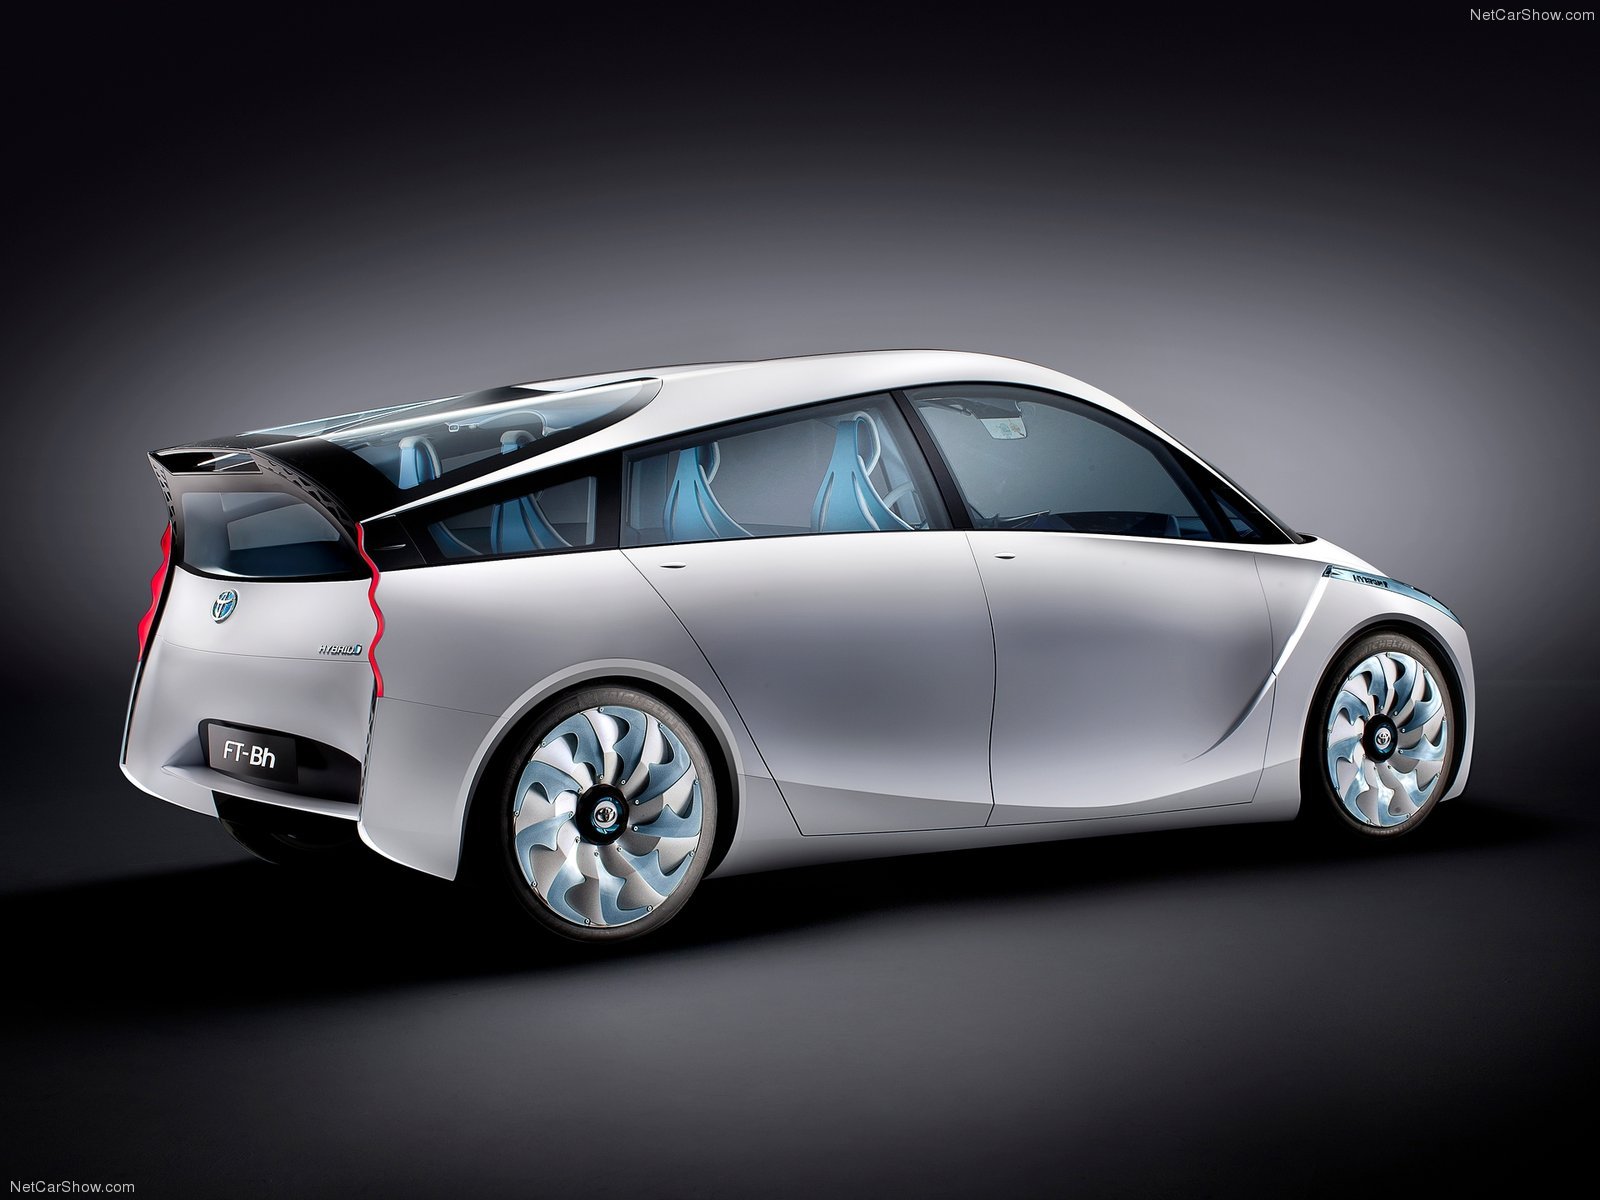 toyota, Ft bh, Concept, Cars, 2012 Wallpaper